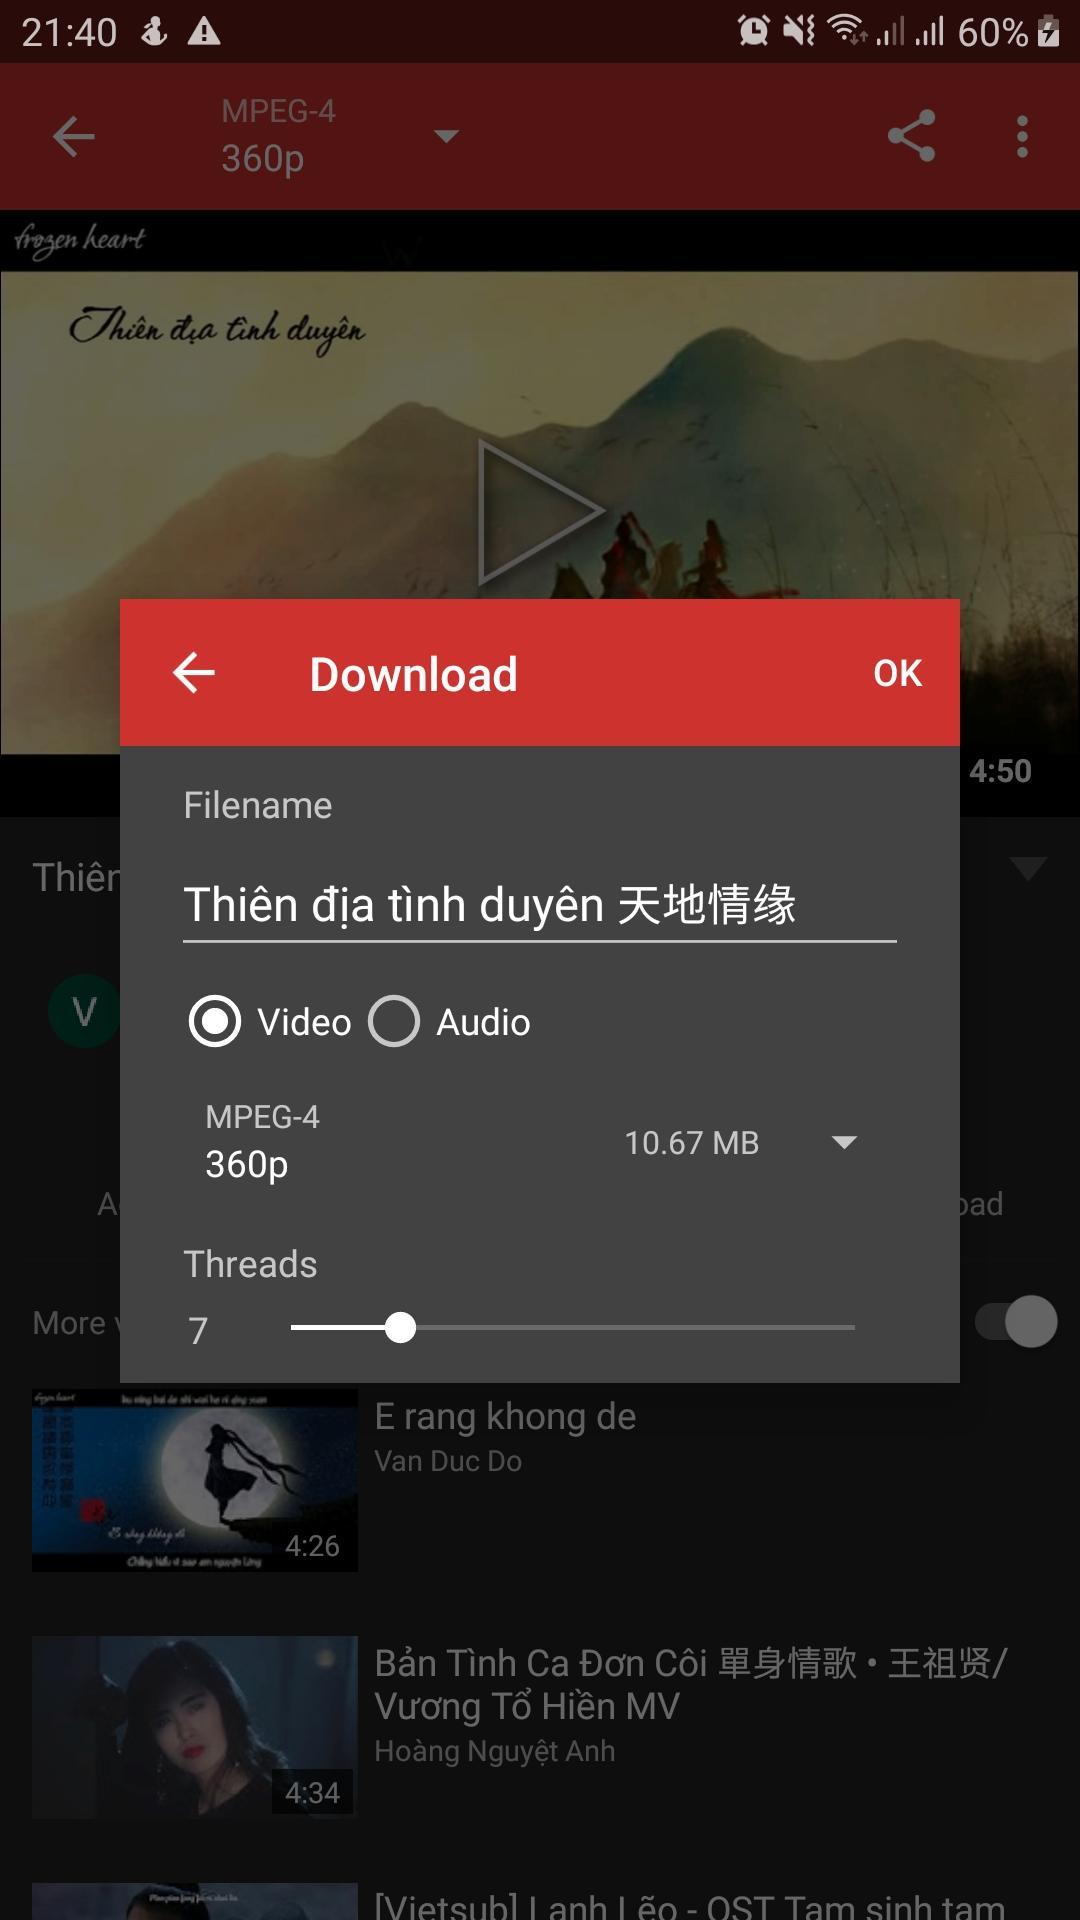 Fast HD Video Downloader, MP3 Tube Player 2019 for Android - APK Download